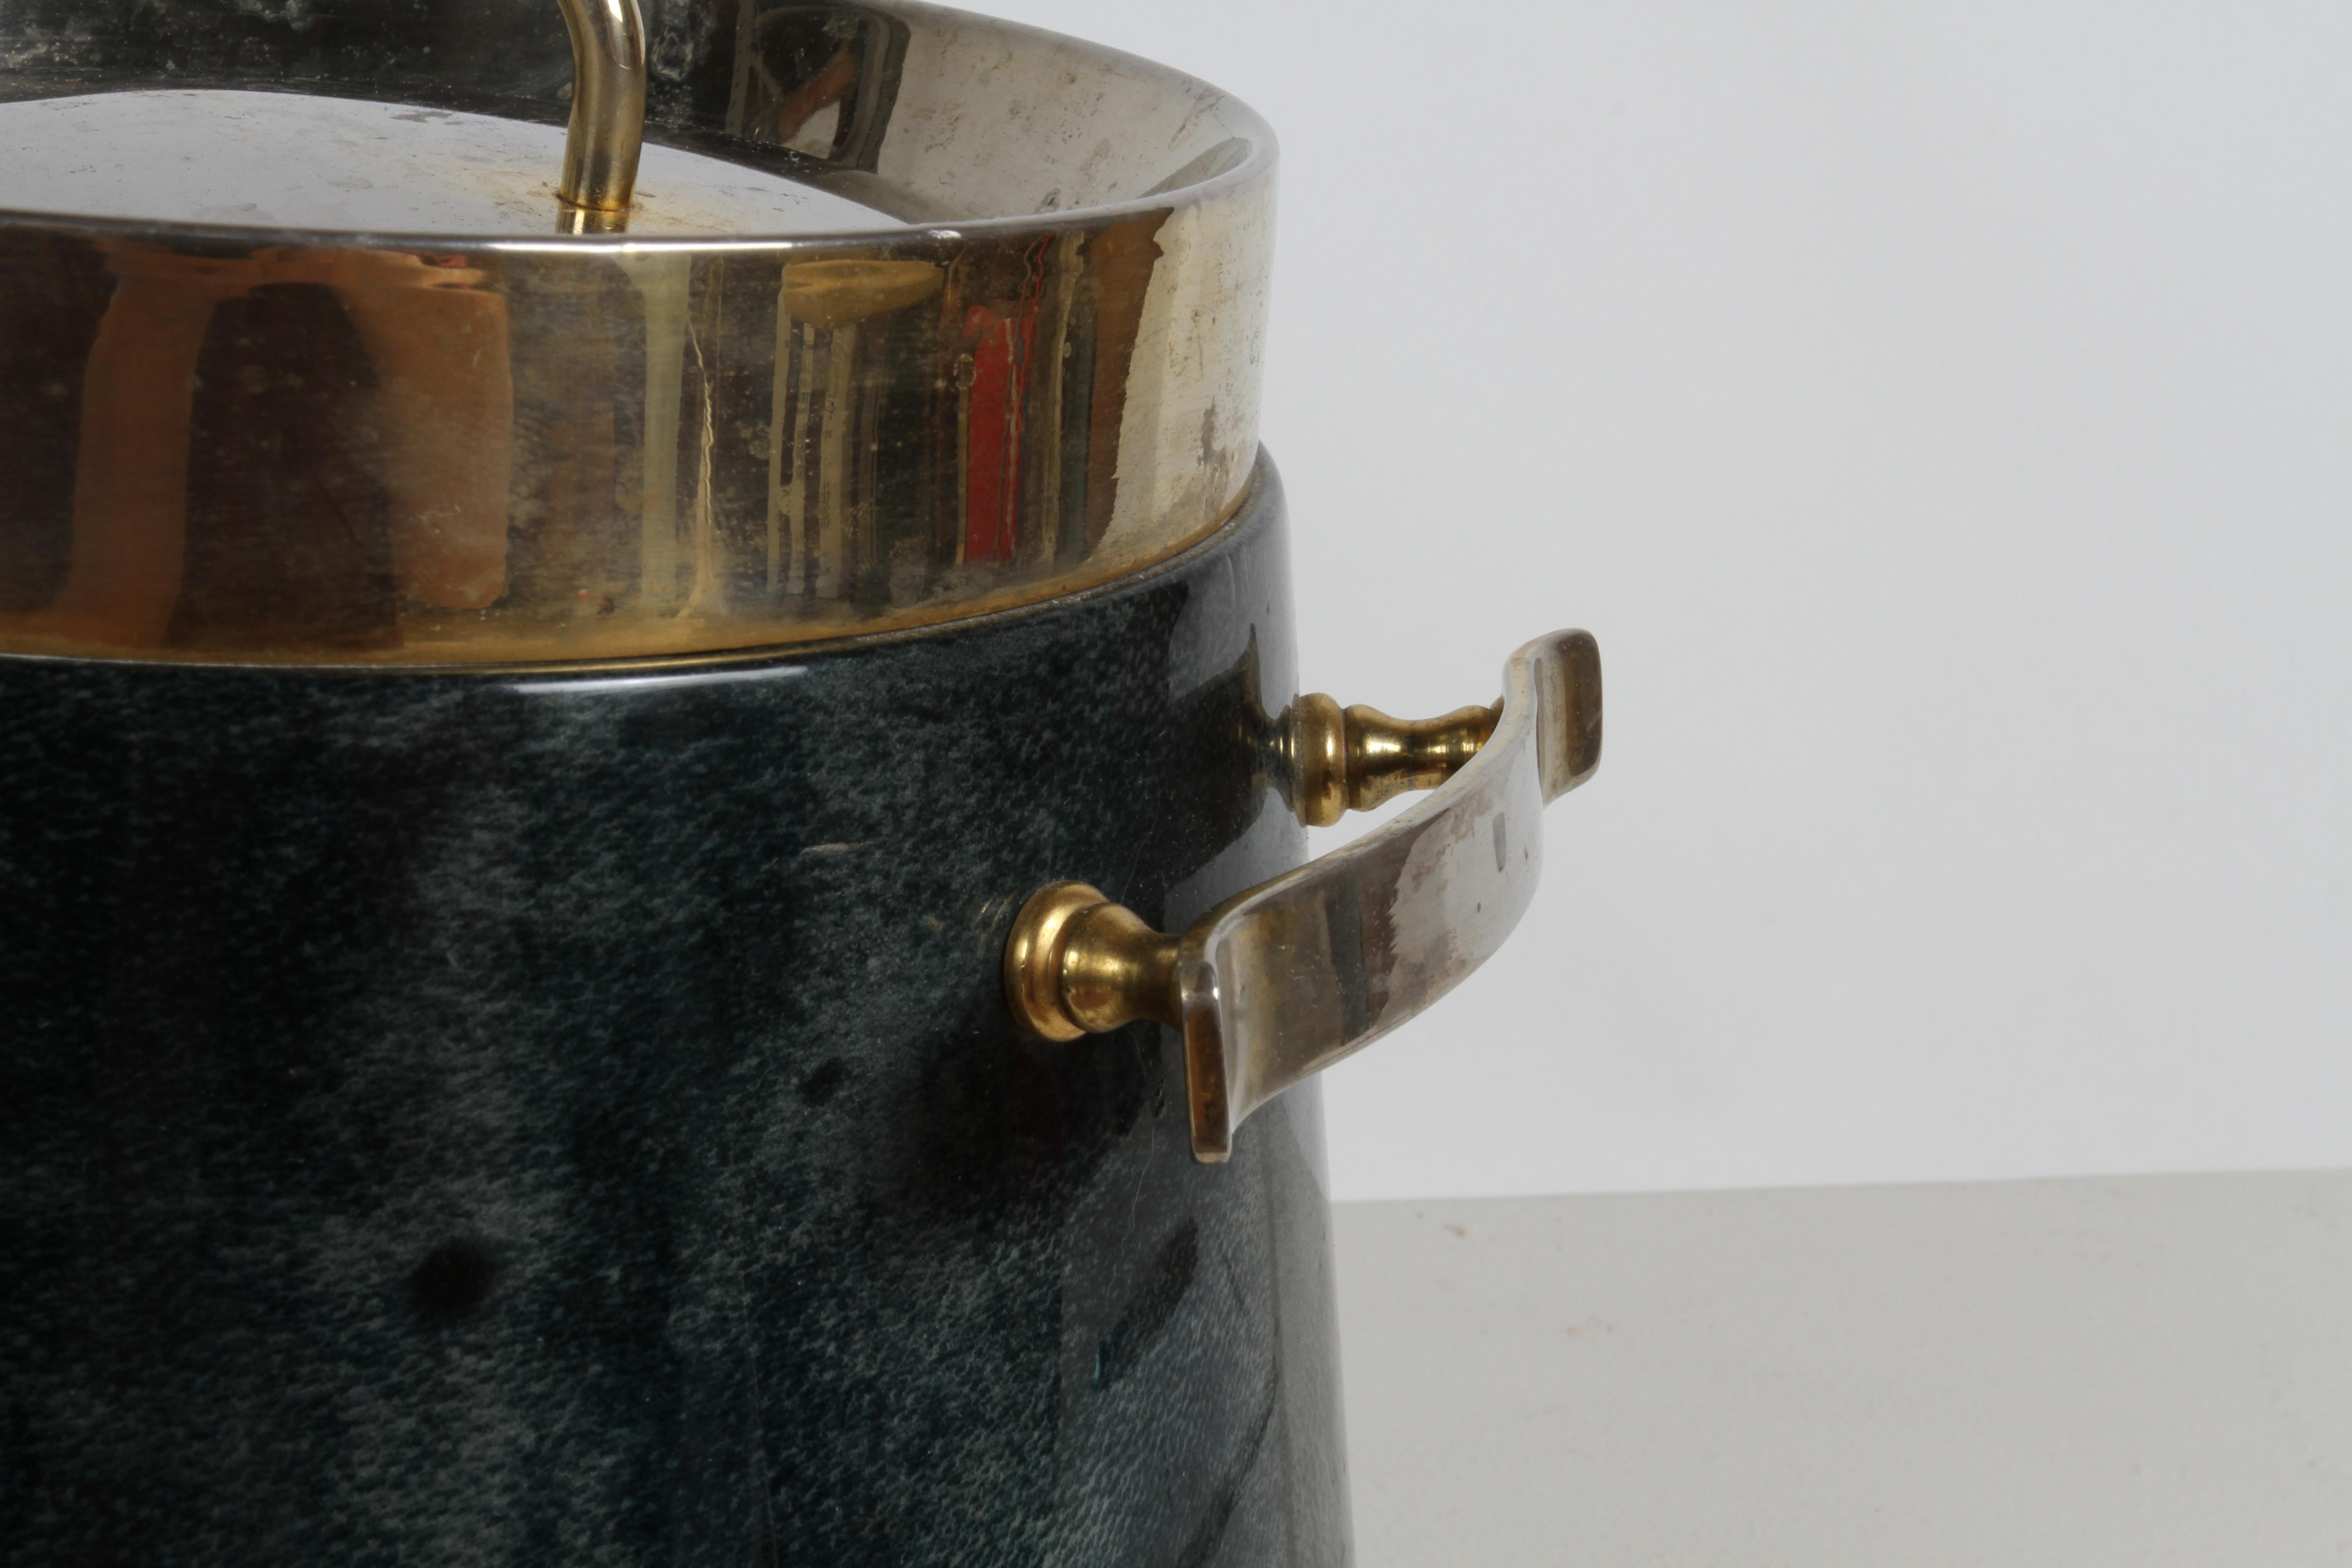 Fabulous 1960s Aldo Tura ice bucket in rich green lacquered goatskin, with gold plated hardware, and glass lined interior. Some wear to gold plating to be expected from use, few dings, Goatskin in very nice condition. Labeled Tura - Italy